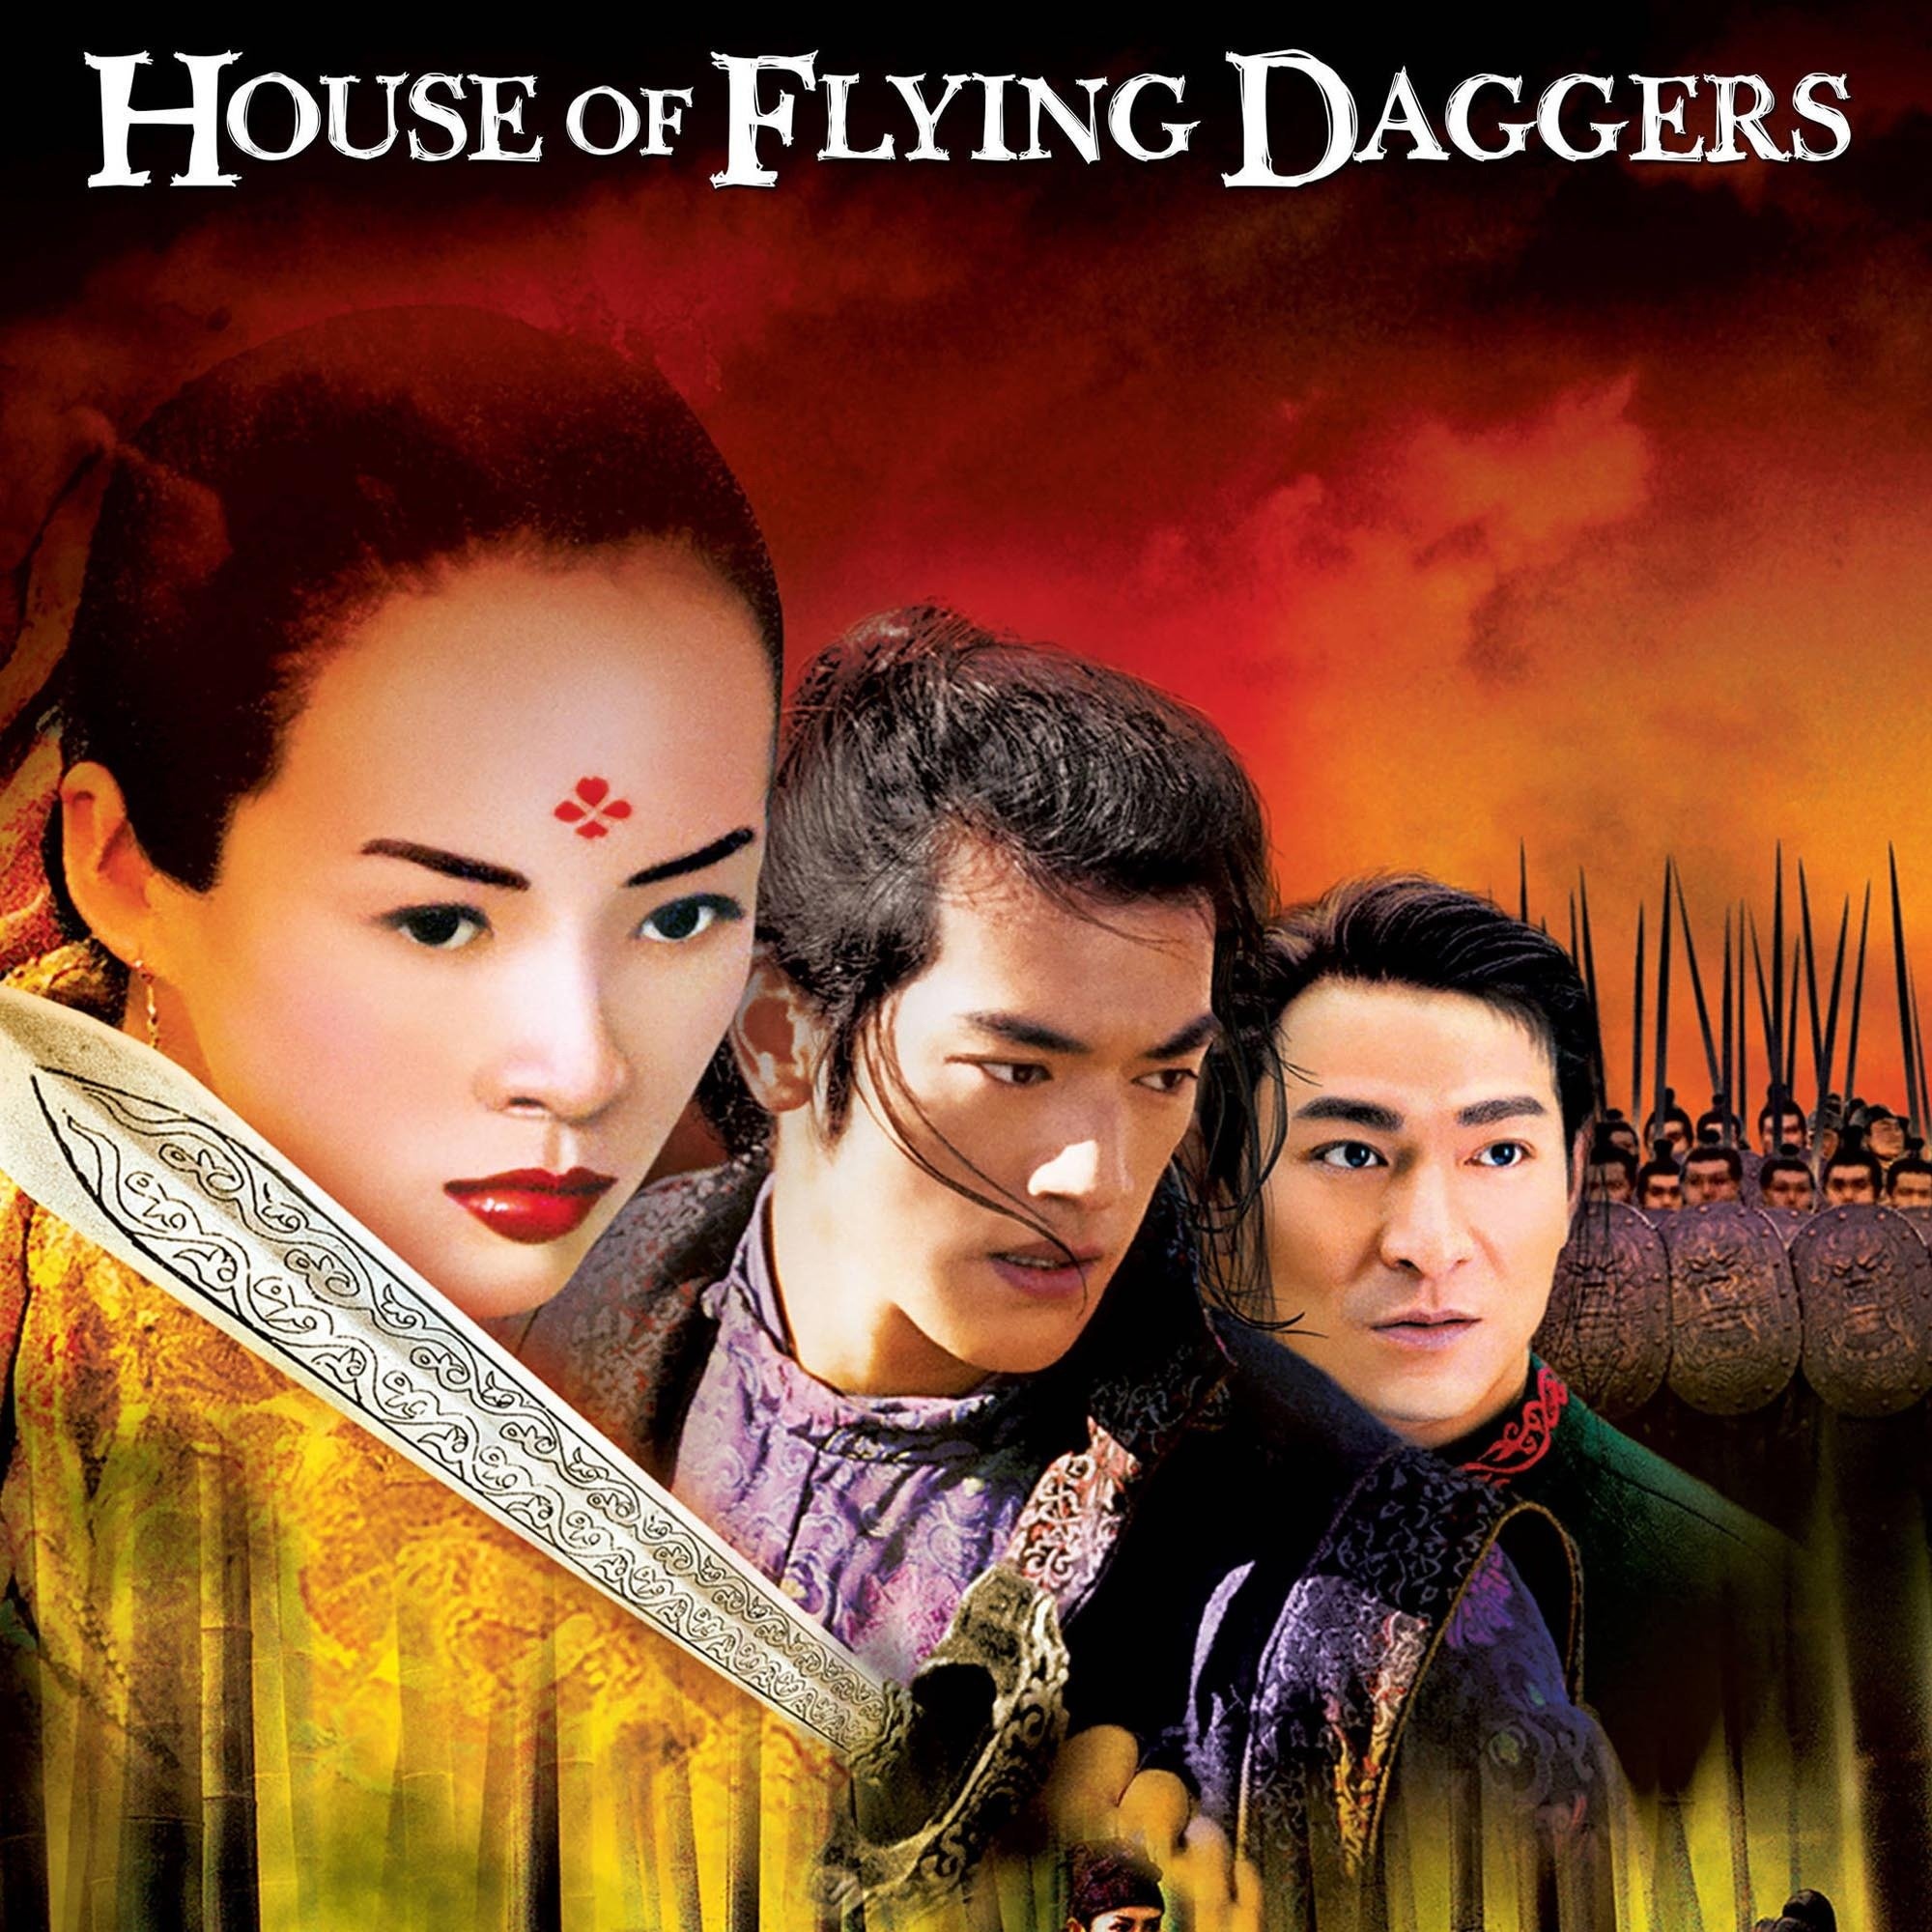 House of Flying Daggers, Free online streaming, Martial arts epic, Unforgettable story, 2000x2000 HD Handy